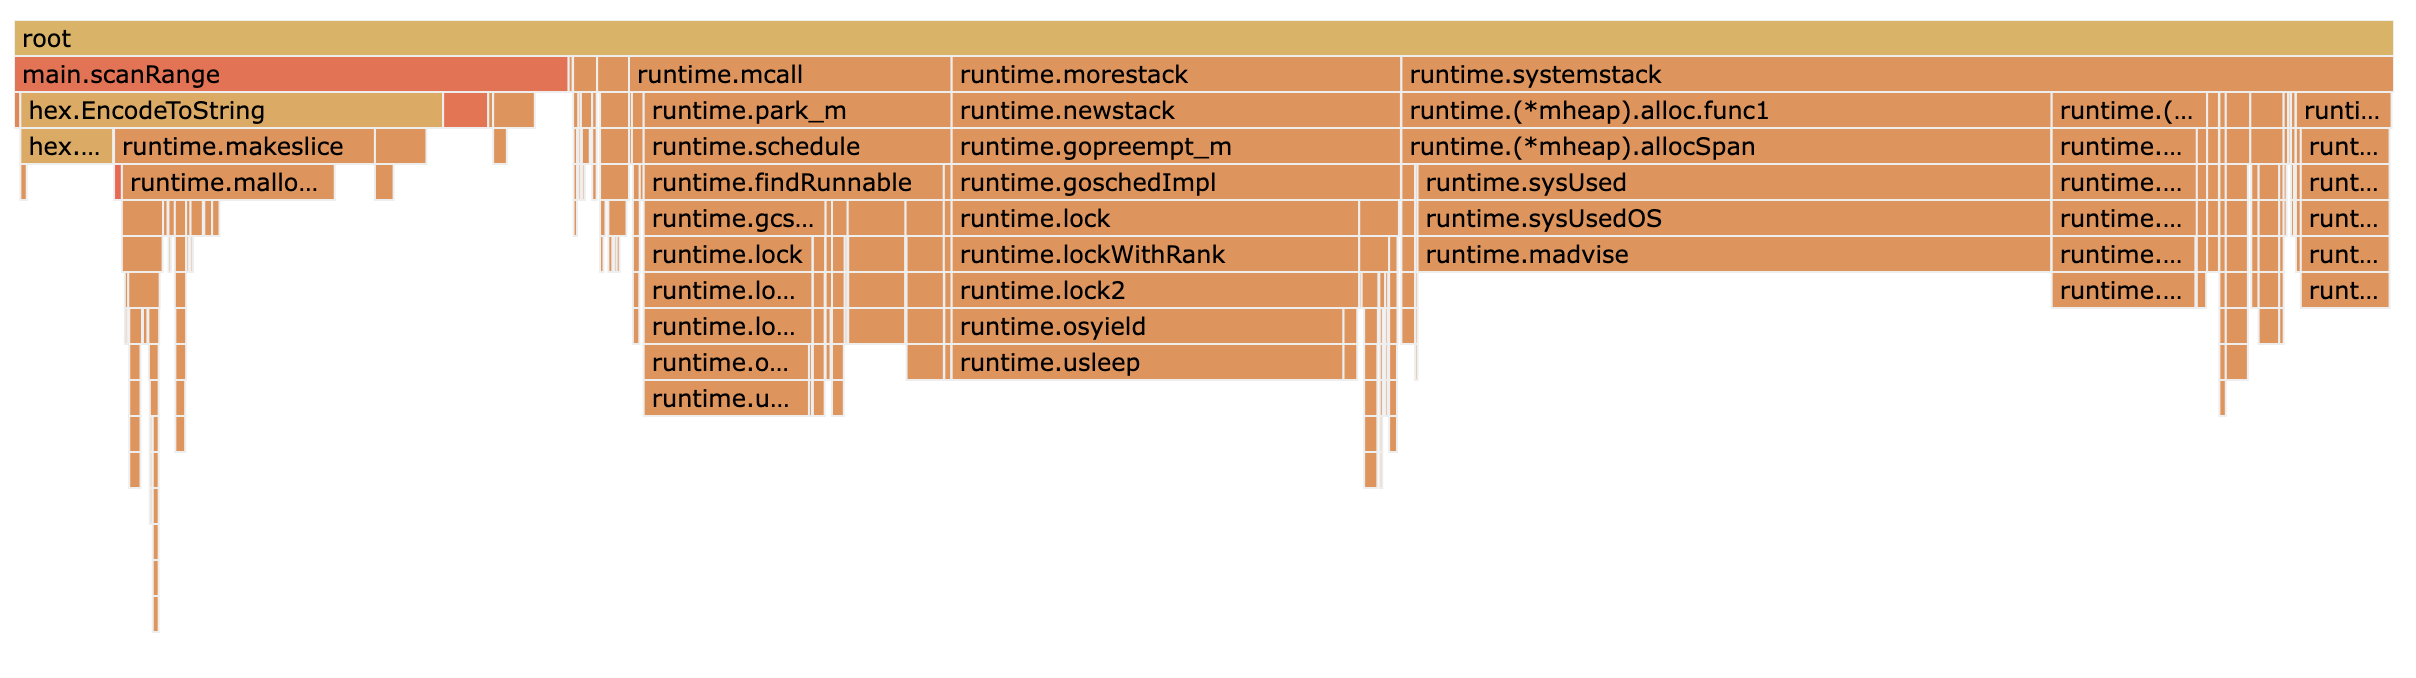 pprof flamegraph showing allocations caused by hex.EncodeToString